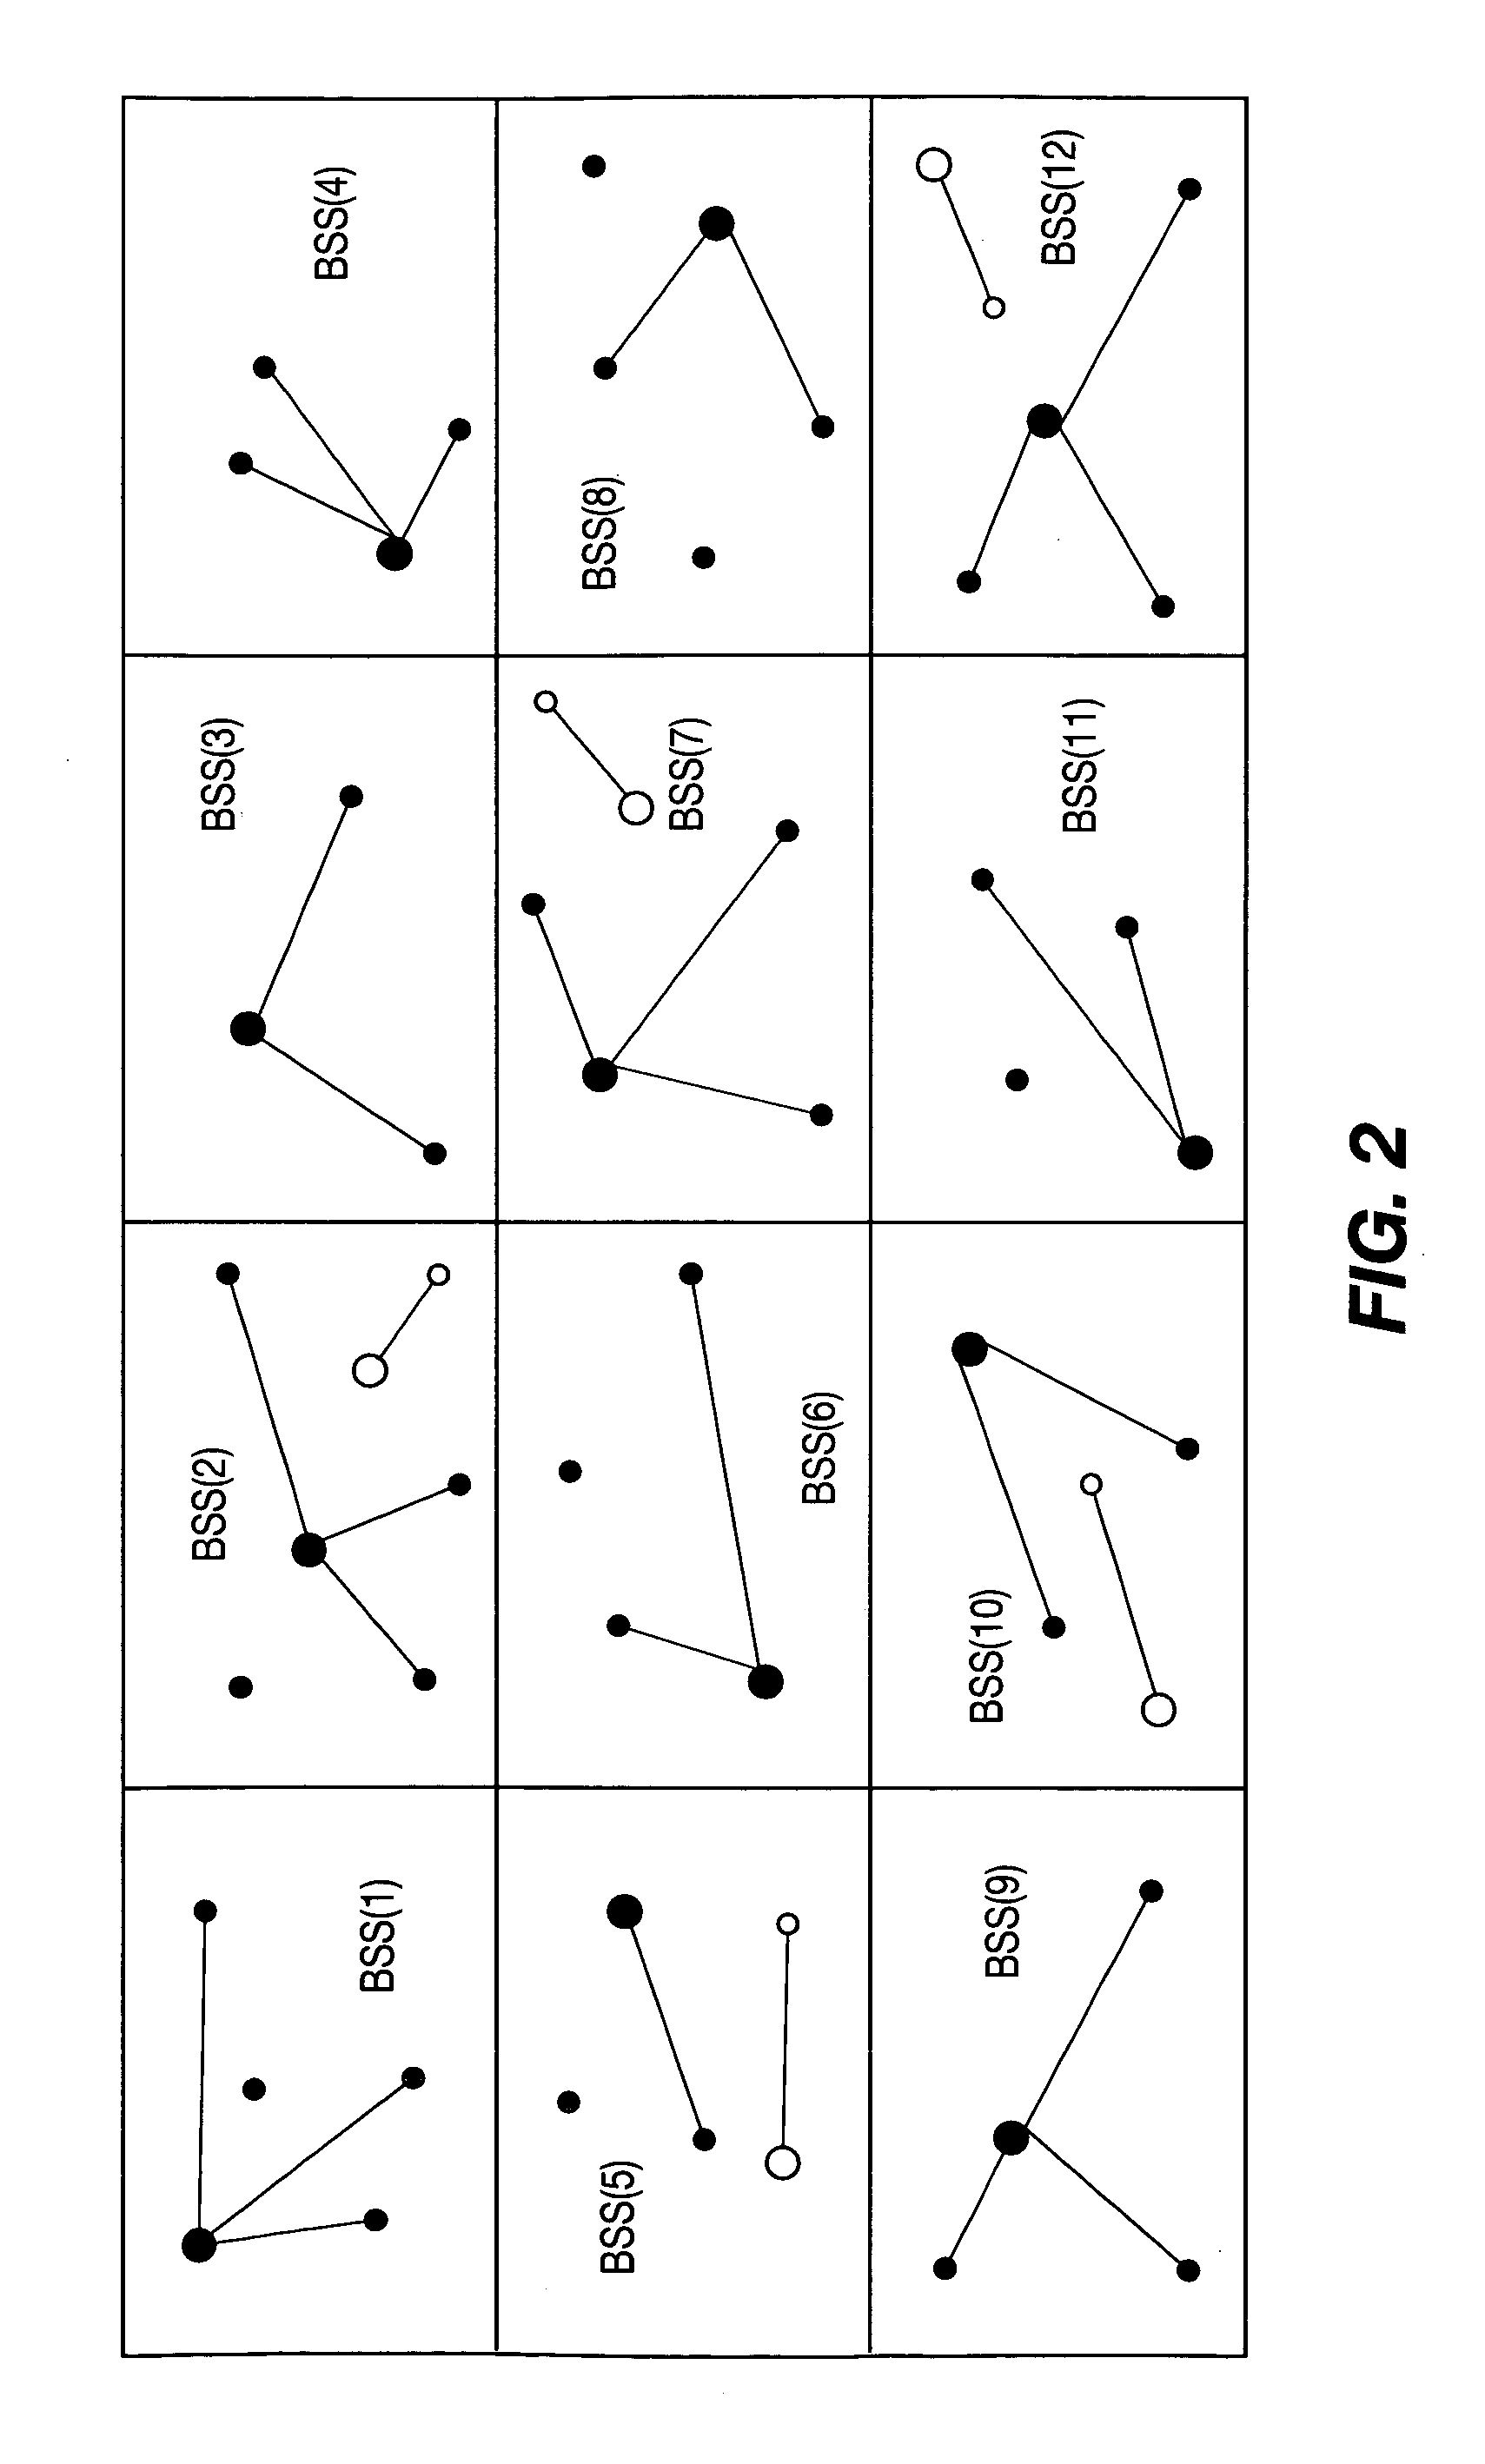 Channel Selection Method For Wireless Networks